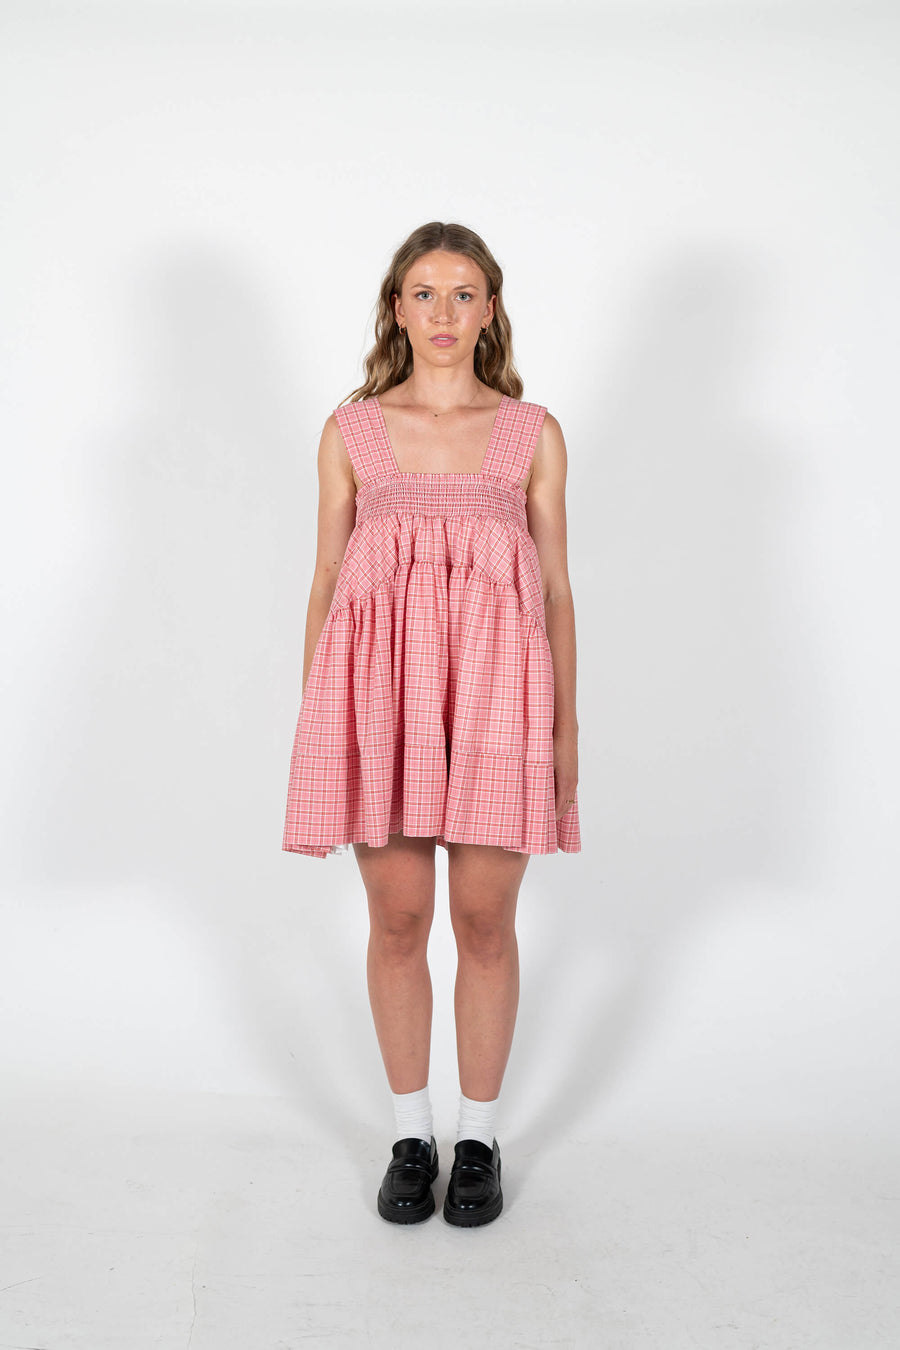 Nellie wears the Spring Summer Mirabel Dress in Rose Pink plaid.